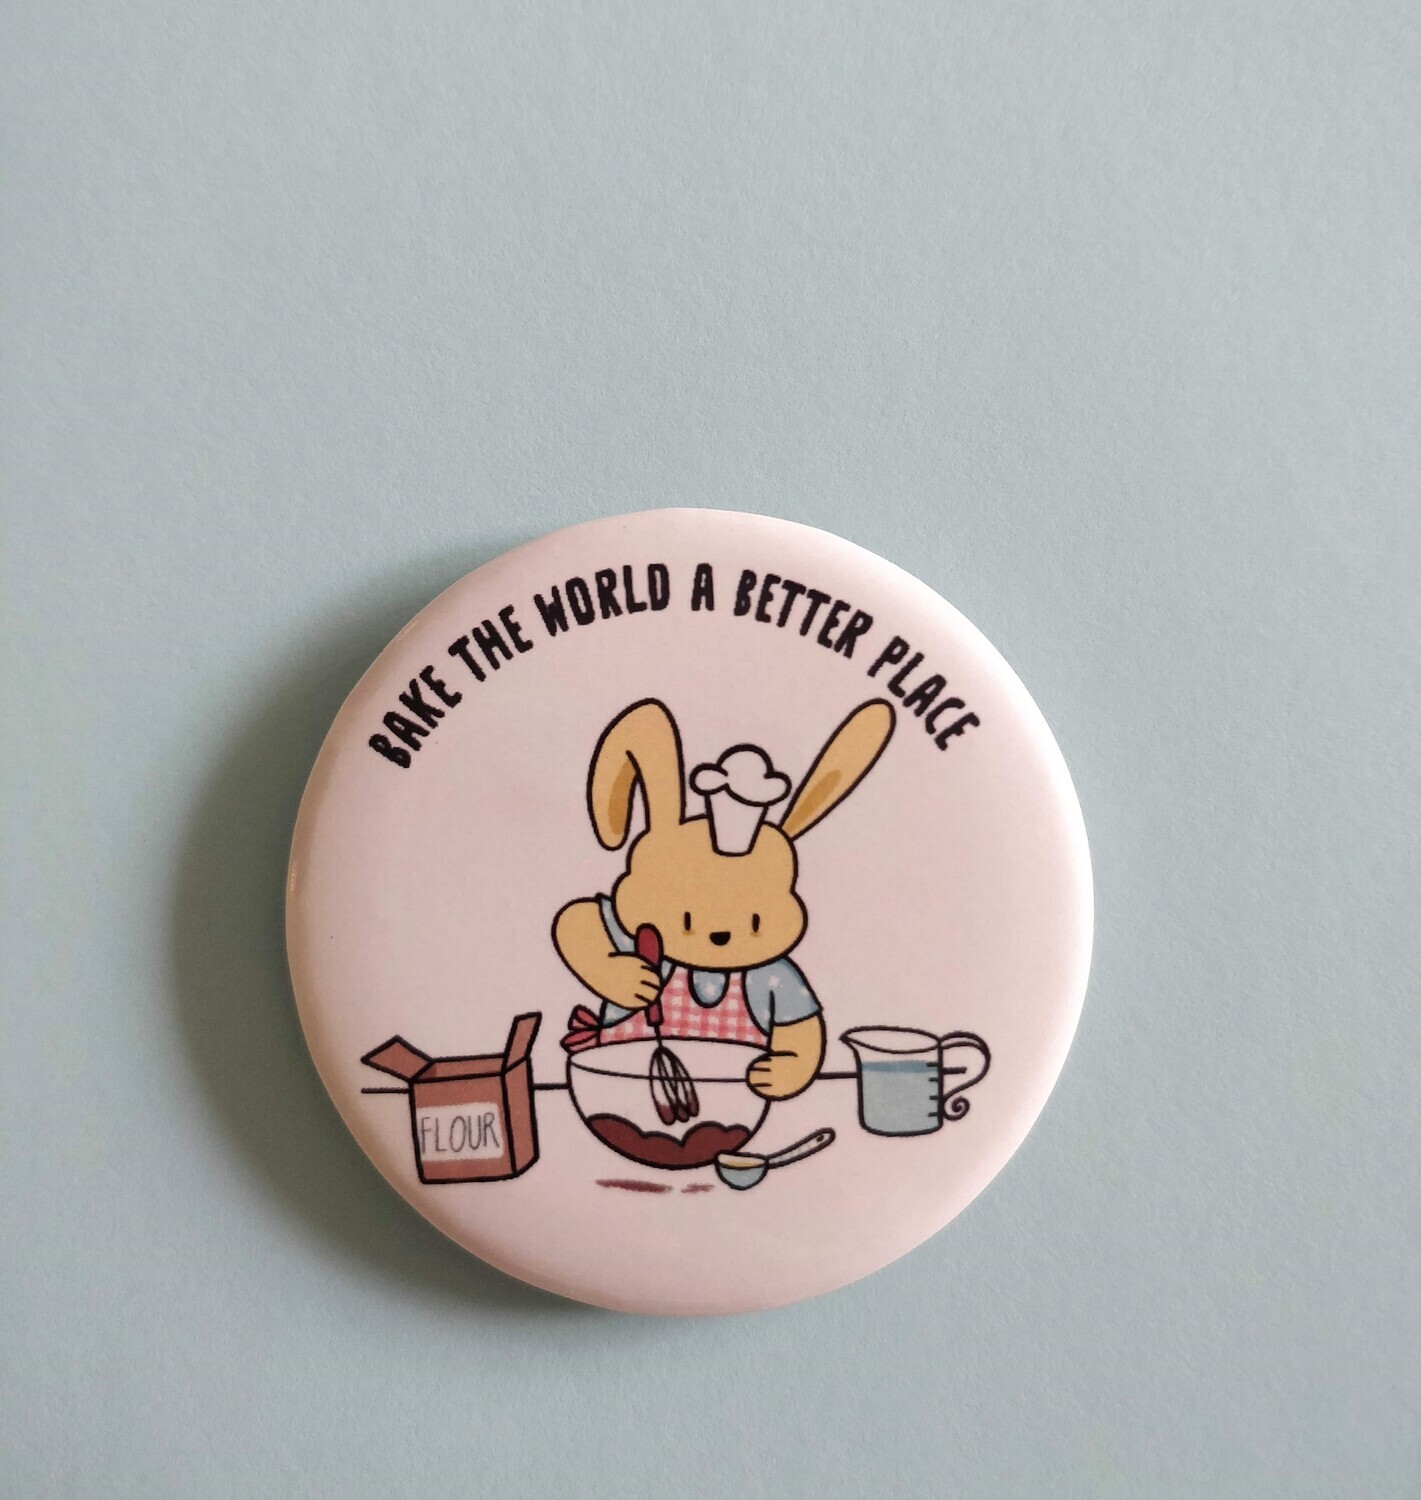 Bake the world a better place - Badge